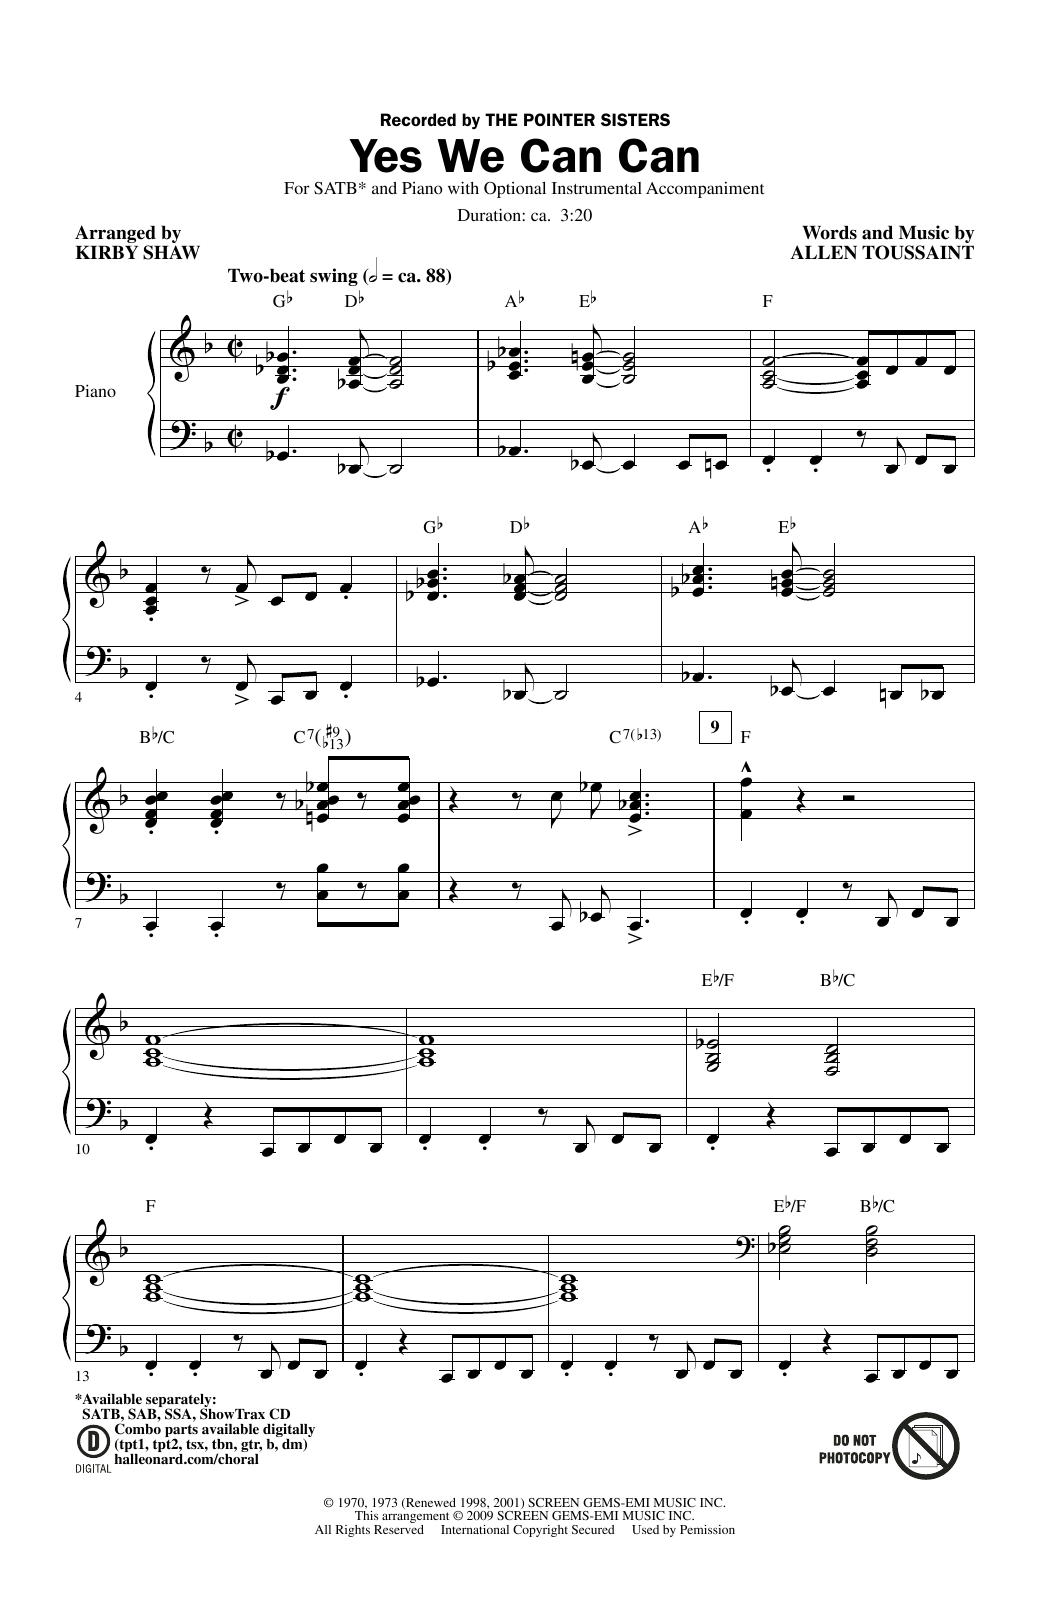 Download The Pointer Sisters Yes We Can Can (arr. Kirby Shaw) Sheet Music